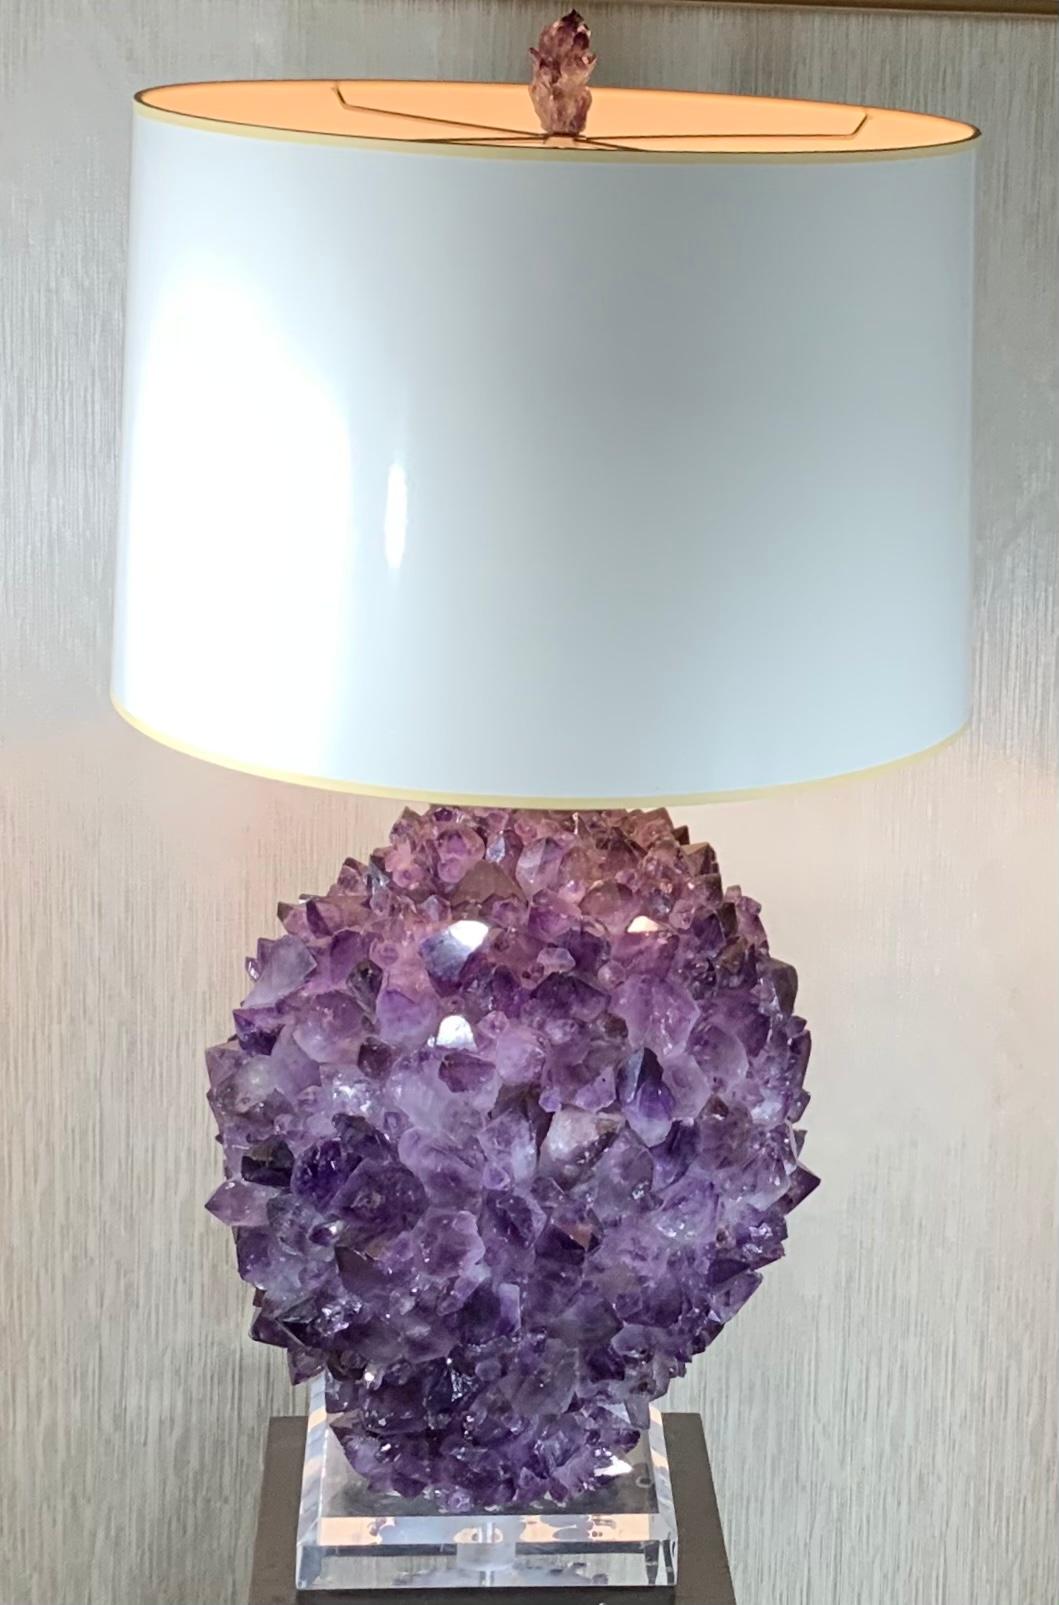 Stunning crystal table lamps, made from Genuine amethyst rock crystal in the shape of sphere, professionally mounted by the artist on beveled Lucit base. Crome hardware with 3 way light socket. Amethyst top lamp finial
Included. Shade is not